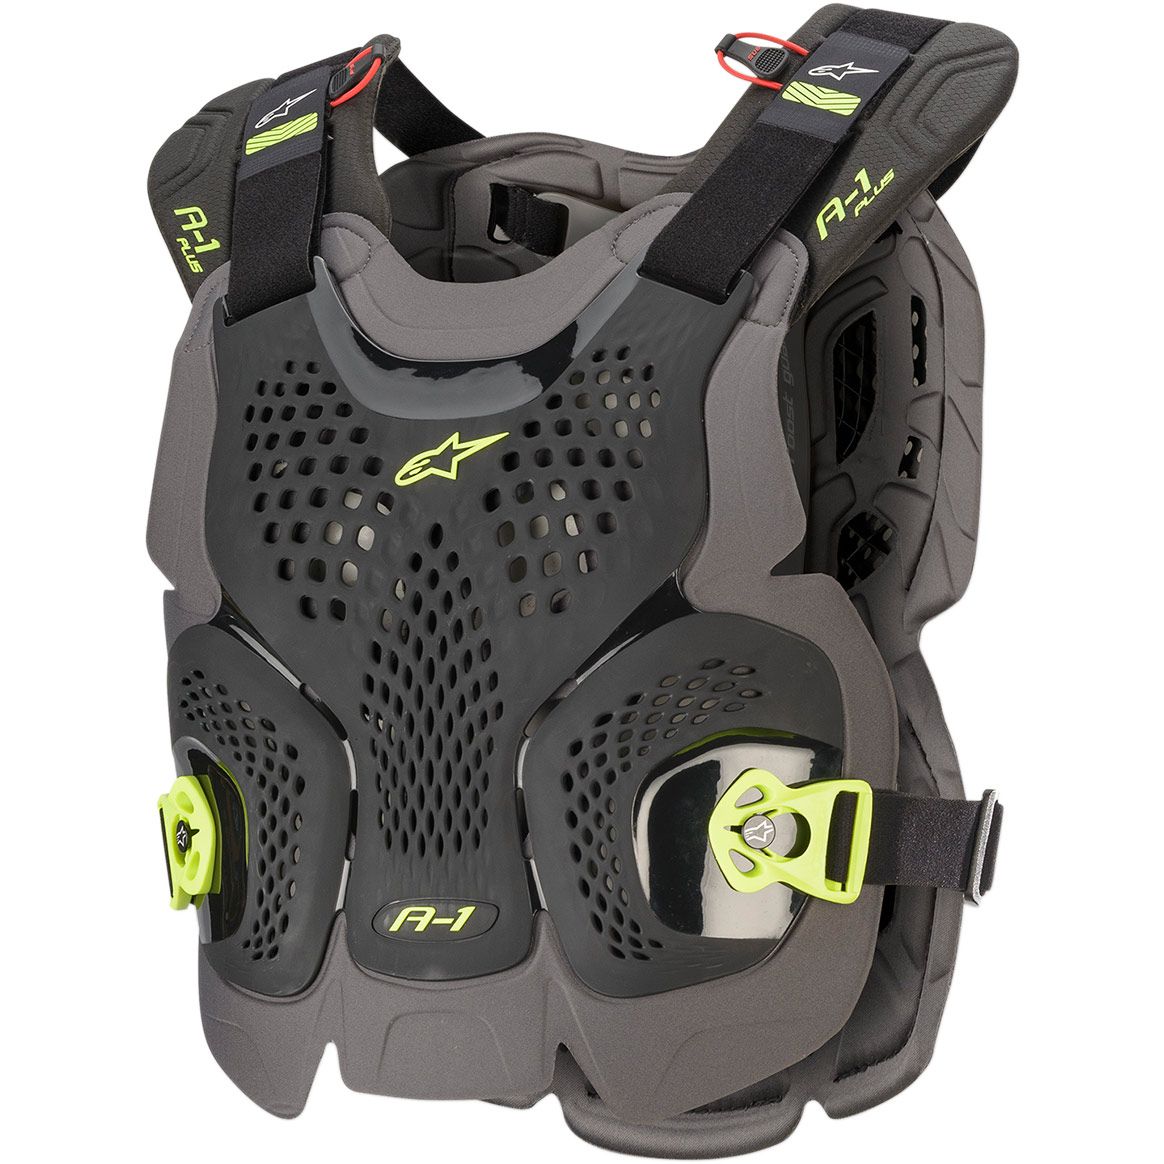 The Alpinestars A-1 Plus Chest Protector is lightweight and comfortable.